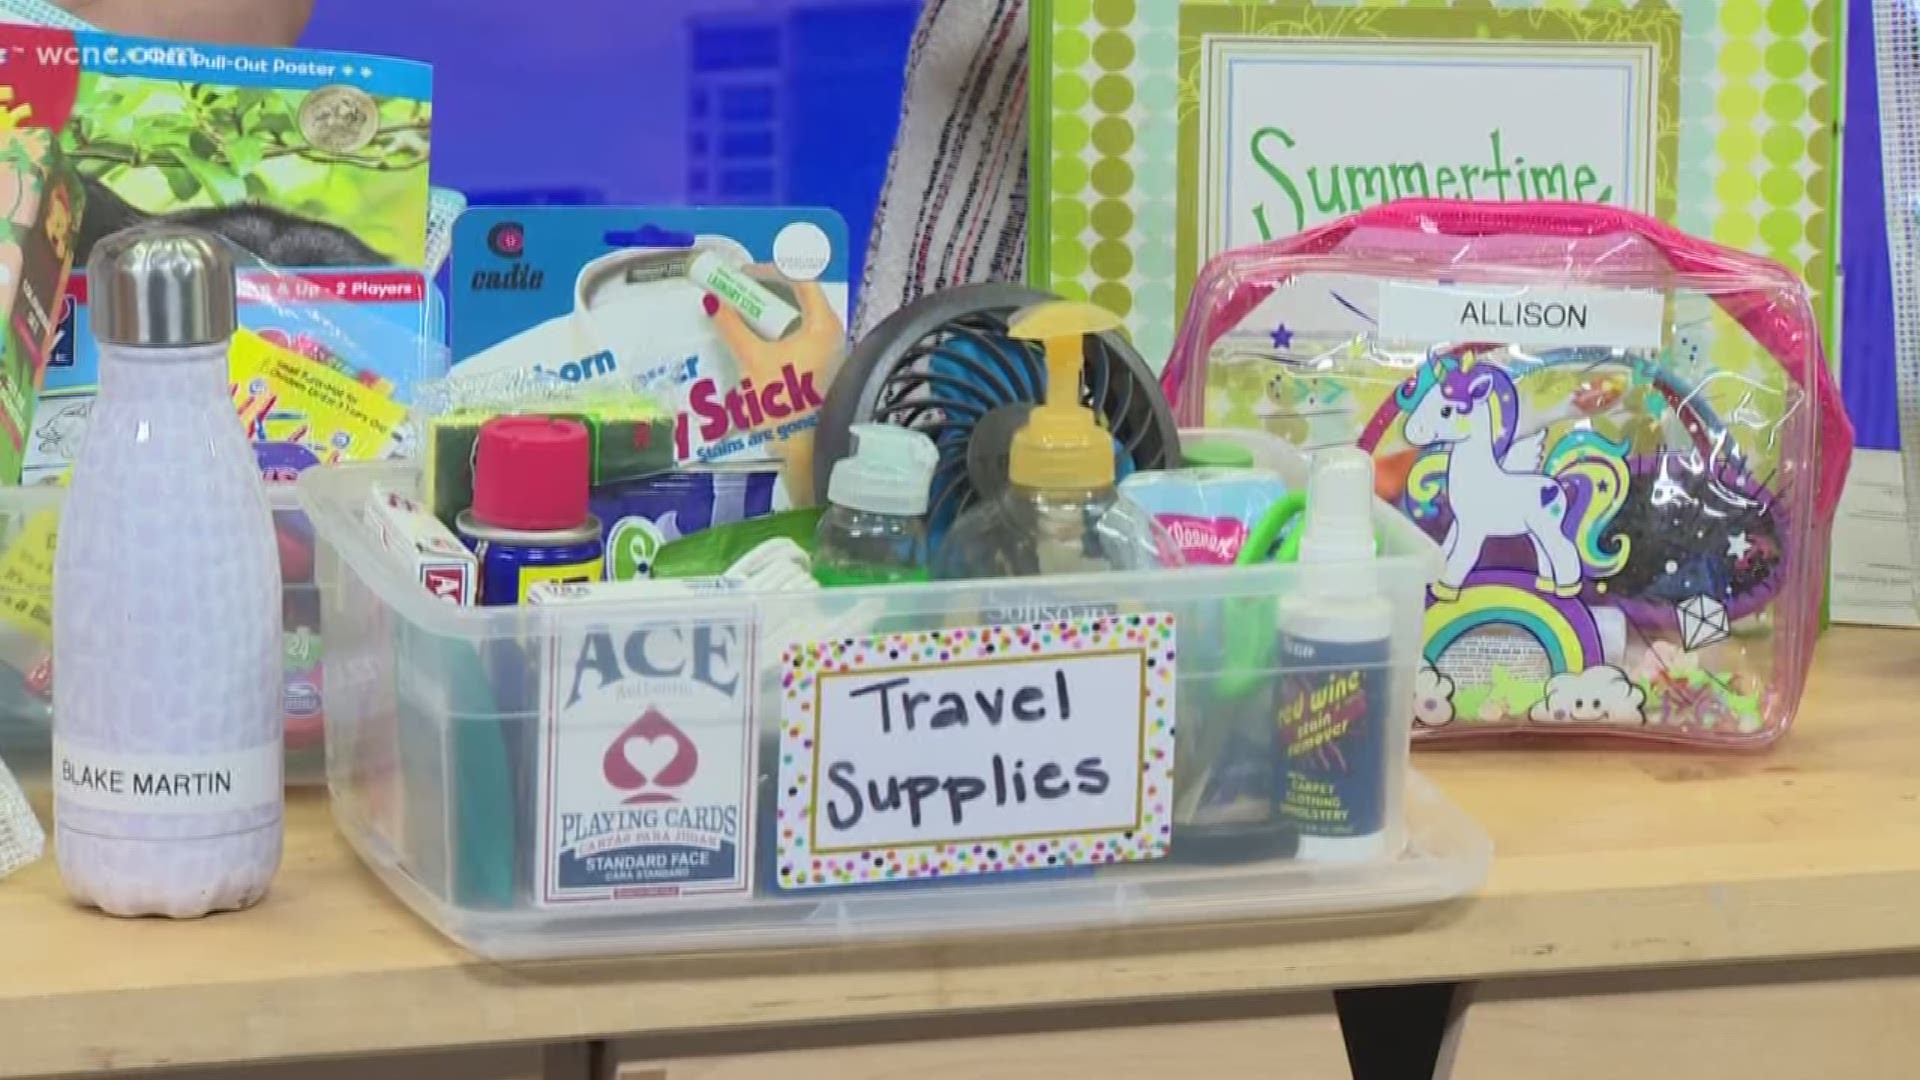 With vacation plans and activities for the kids, it can be hard to stay organized over the summer. Laurie Martin with Simplicity Organizers shares tips to stay on track.